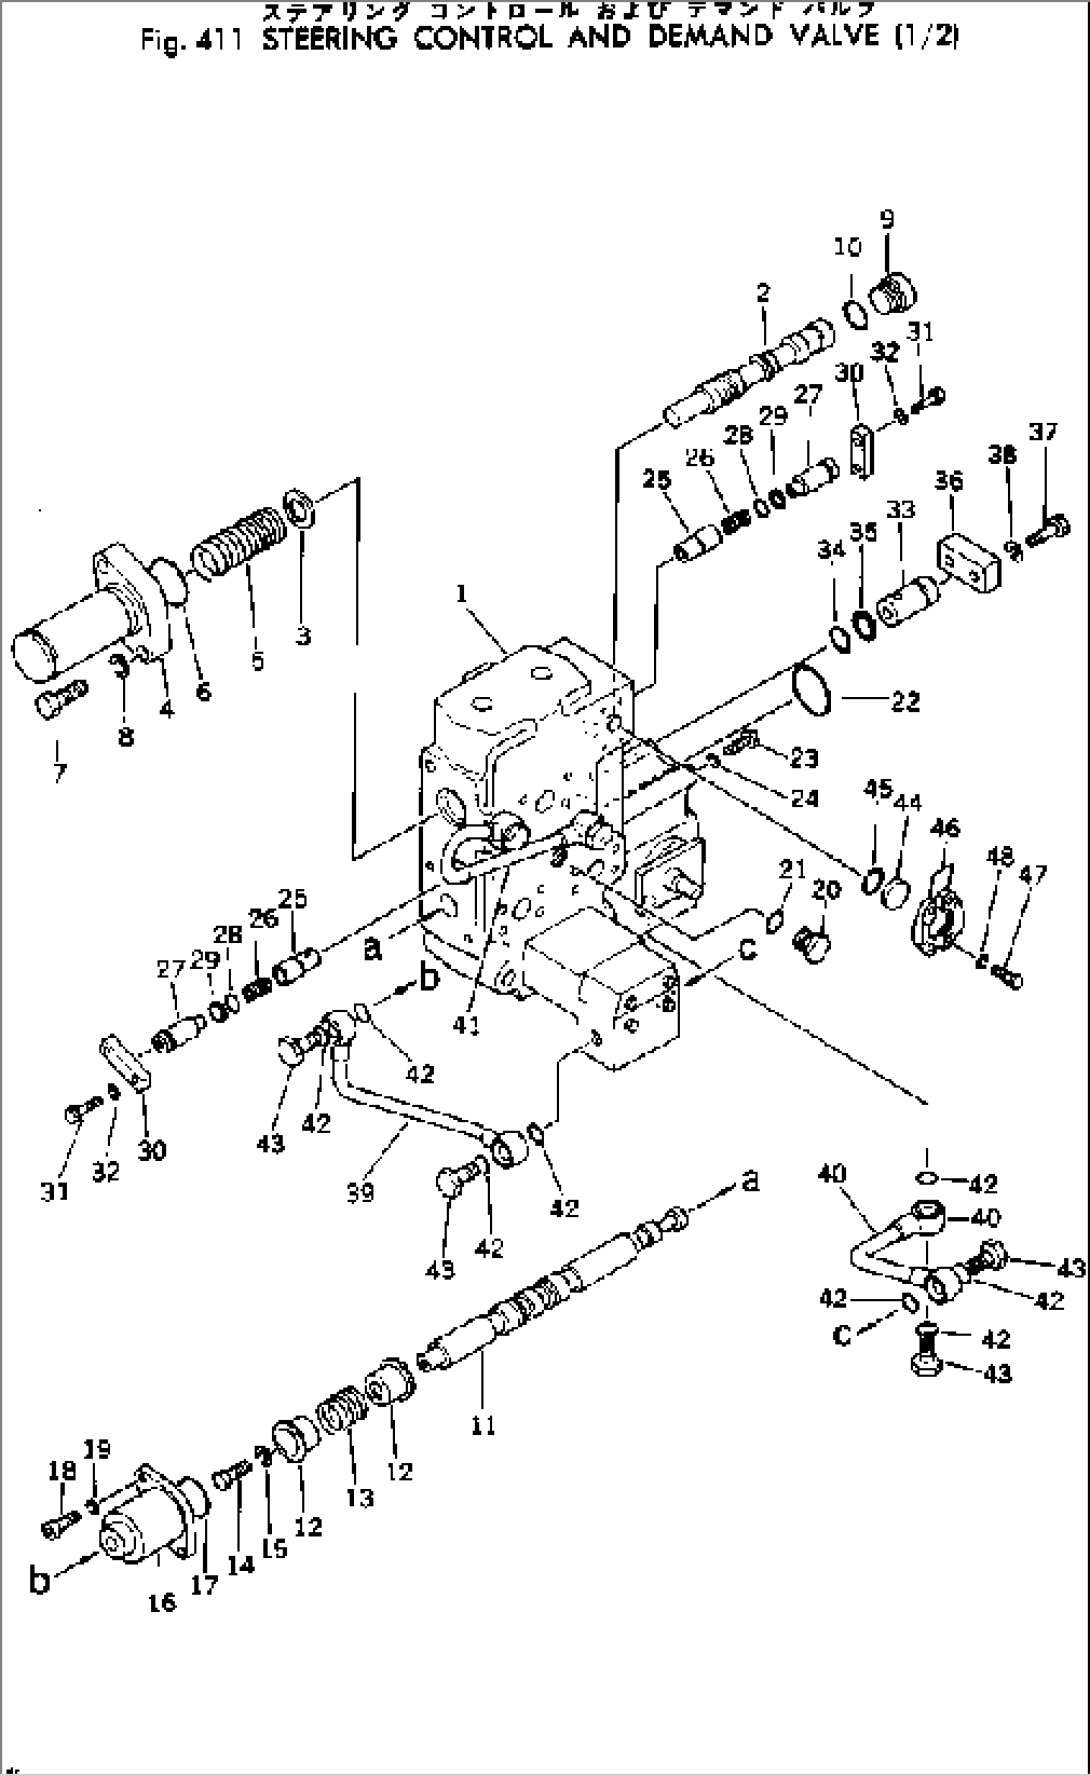 STEERING CONTROL AND DEMAND VALVE (1/2)